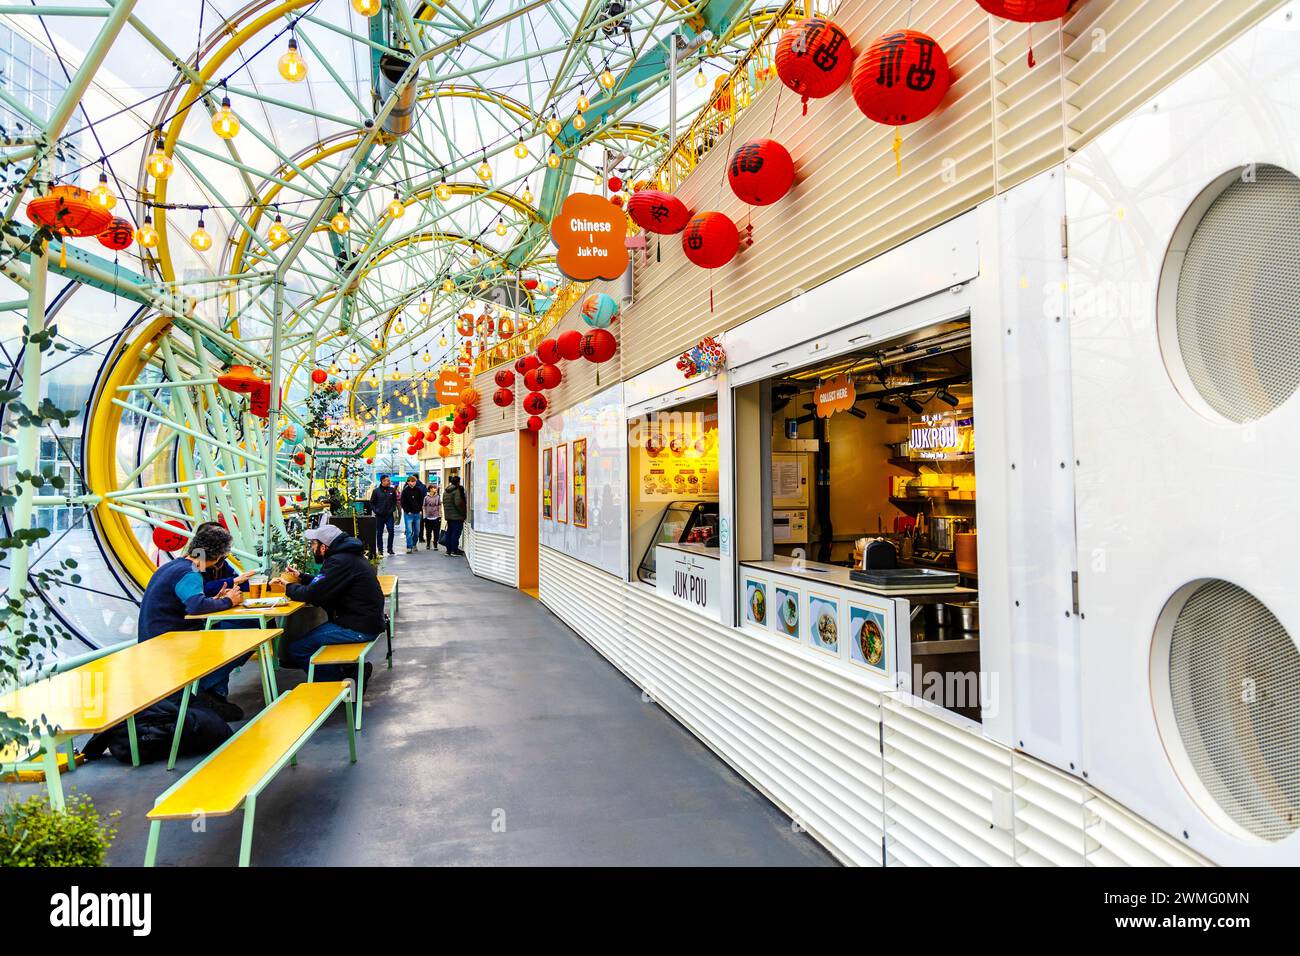 Interior of the Design District Canteen pavilion, North Greenwich, London, England Stock Photo